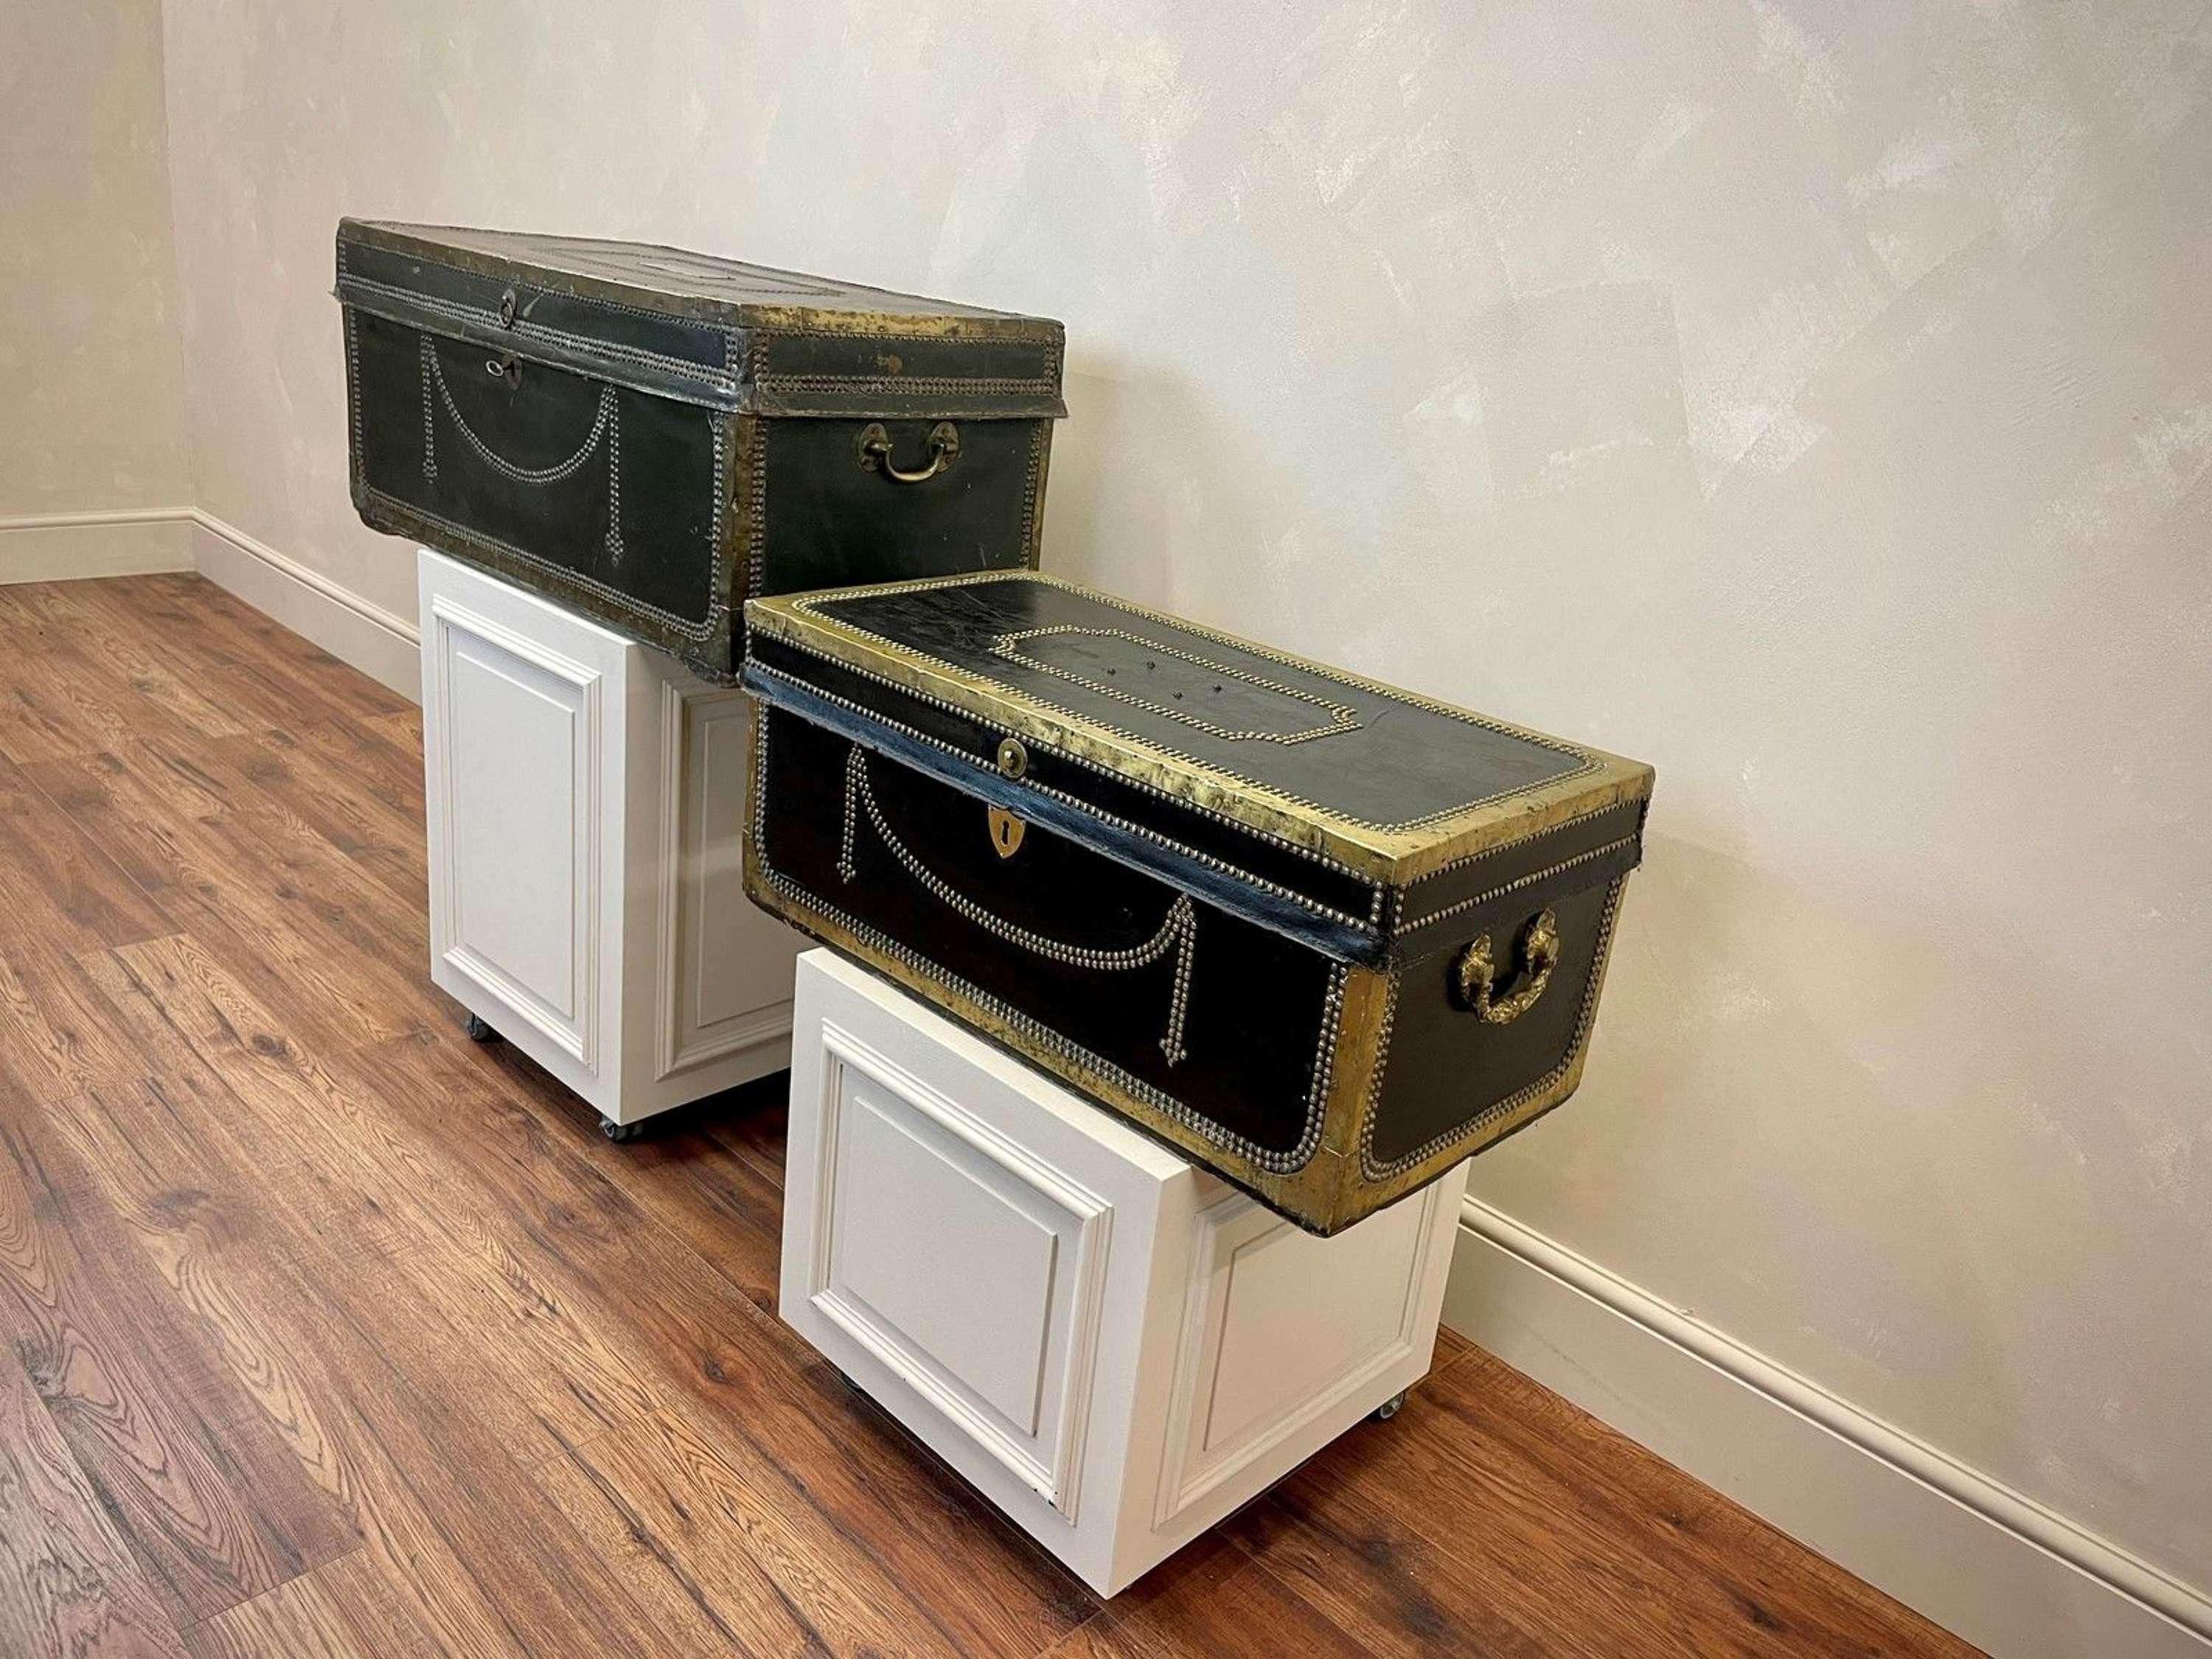 Two large leather camphor trunks, circa 1830. One dark green and one black leather, both bound and decorated in brass with swag nail head detailing. Both clean inside.
Manufactured by the British East India Company for an officer to carry his kit